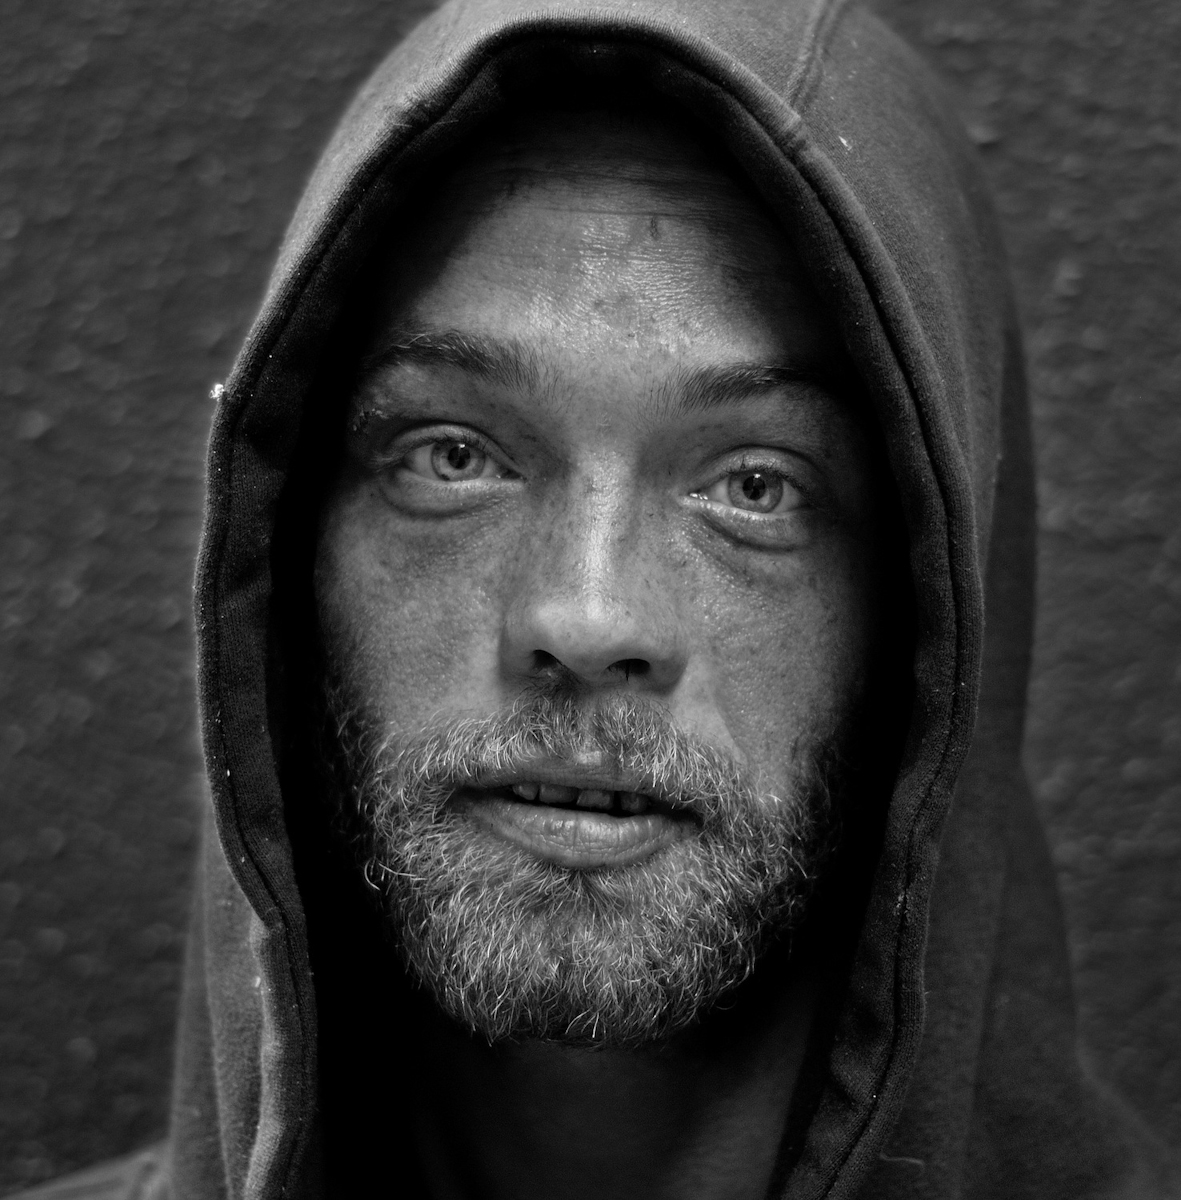 YOUNG HOMELESS MAN, SAN FRANCISCO, MAY 2006homeless brian from atlanta; people call him {quote}freelove.{quote} brian has been on the street since '98. as a child he lived mostly with his mother; and moved from state to state quite frequently.brian believes that the soul is not part of the body; rather that the body is part of the soul. he believes that his larger soul is extremely fragmented and possesses many incarnations; some simultaneous. he has memories from his other souls and his other bodies. he sometimes refers to them as ghosts; sometimes as dreams.he describes memories as a child of how his ghosts were used for physical acts by various family members and how his soul was sold to strangers.he describes how at 16 he was being used by a woman he didn't know. or it was a dream. or it was his ghost. but then he knew her and it was his mother. and she told him he was committing a sin and how could he be so sinful. and she tried to {quote}crush{quote} him as she tried to make him repent his sin.he believes that people you know can be connected to your seven chakras and thus be a part of you. his {quote}root{quote} chakra is a chinese girl he knew in '95 named ann. he met her in sacramento when he was living with his mother. he thought she was a gift and he didn't know how he had gotten so lucky. ann was there visiting a friend or such. she worked in a dotcom in sunnyvale.some time later, he went after her to sunnyvale to try and find her. he found her, but she would only see him in secret once a week and would make him call her daily in case she wanted to see him the following day. he was confused by her behavior and missed a day. he never saw her again. he felt her loss like a blow to the {quote}solar plexus{quote} and thus associates her with his {quote}root{quote} chakra. she is the love of his life.he says people are bad to him and people use him. he says, about 2 years back, his mother surgically removed his heart and sold it; and had him committed to a mental institution. he says his heart was his hero and he can no longer be a hero without that heart. but he says he had a spare {quote}less modern{quote} heart as a backup.he says things keep getting worse for him. he says he sold his soul to the devil so as to stop his slide. he says he's given himself to evil so that when others do evil to him, it can be no worse. he doesn't believe in actually doing evil to others, however. he says he visits hell frequently. he says that satan is his mistress; but that he's trying to reform {quote}her{quote} so that there will be no more evil in the world.but he's not sure he can. and he feels he's gone too far. he says he needs help soon. he hopes that someone will give him a way out. but he doesn't believe there's much time. he says soon he won't be able to turn back. but for now, there's still time.(5/15/06)